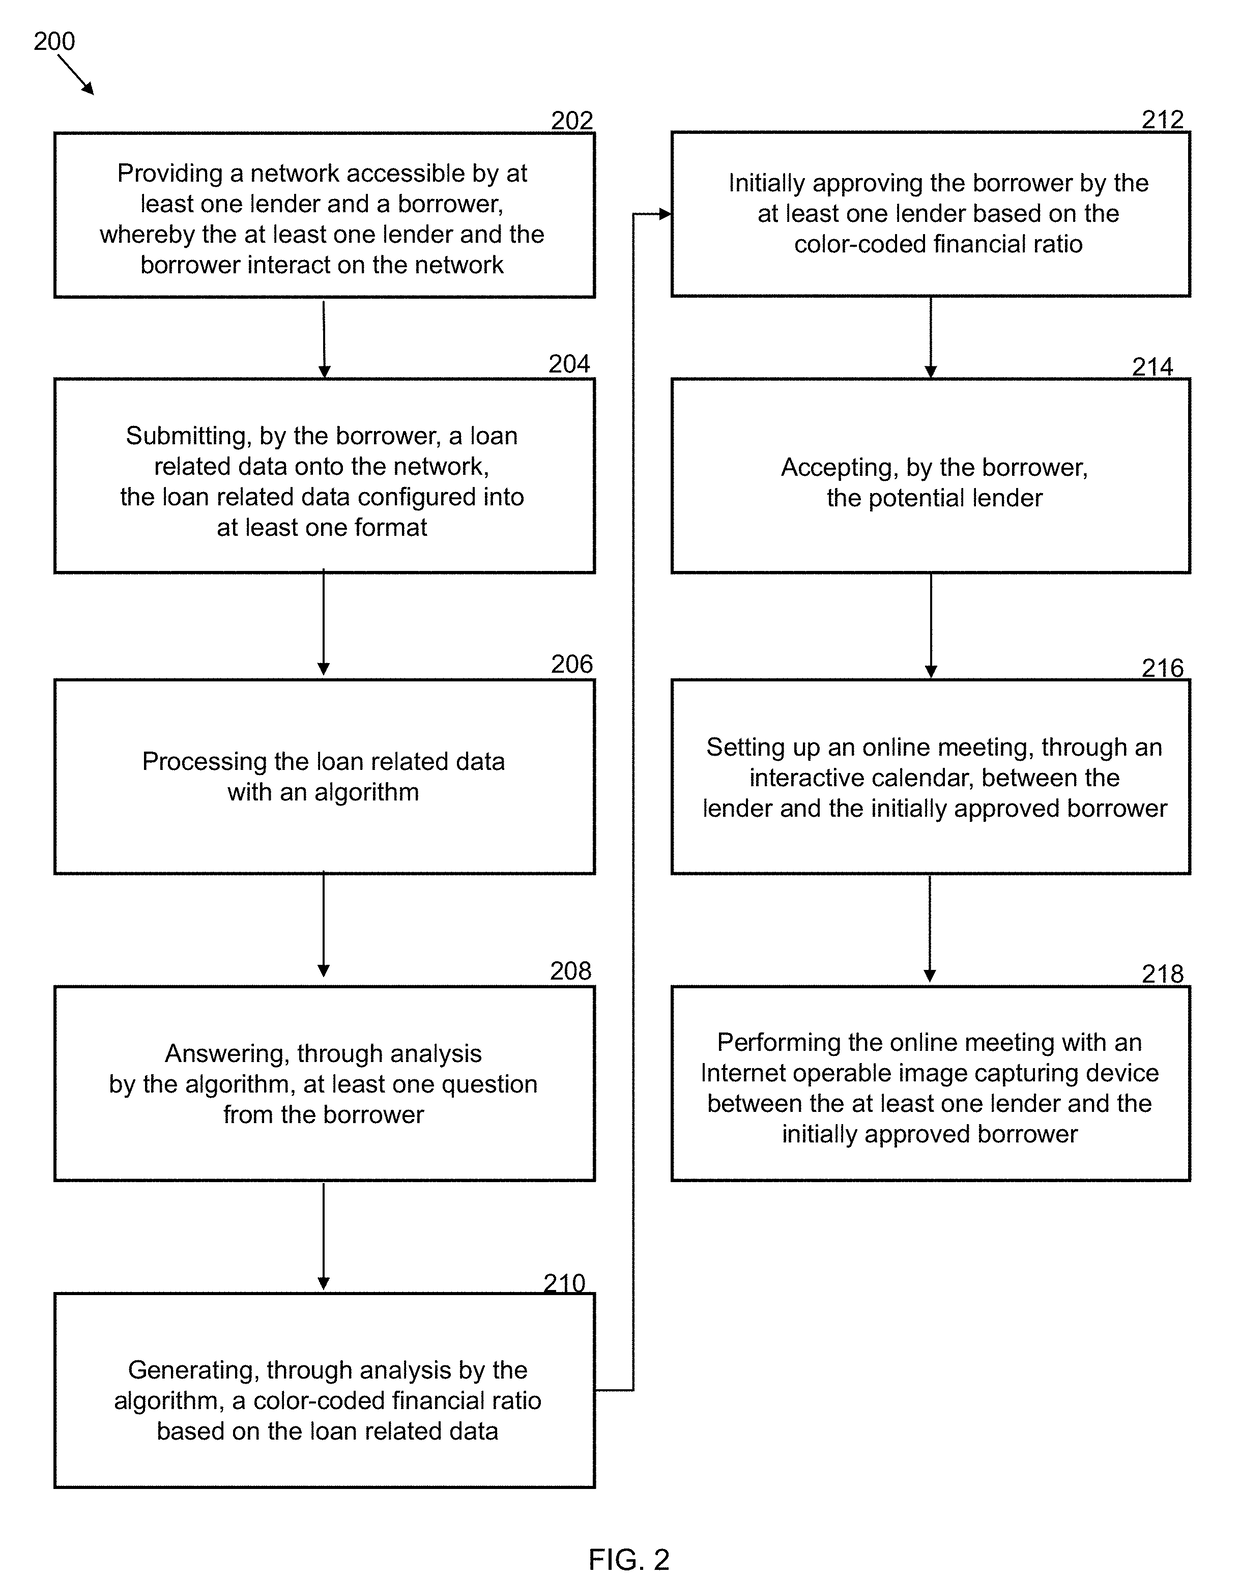 System and Method for Matching Lender with Borrower based on Color-Coded Financial Ratios and through an Online Meeting